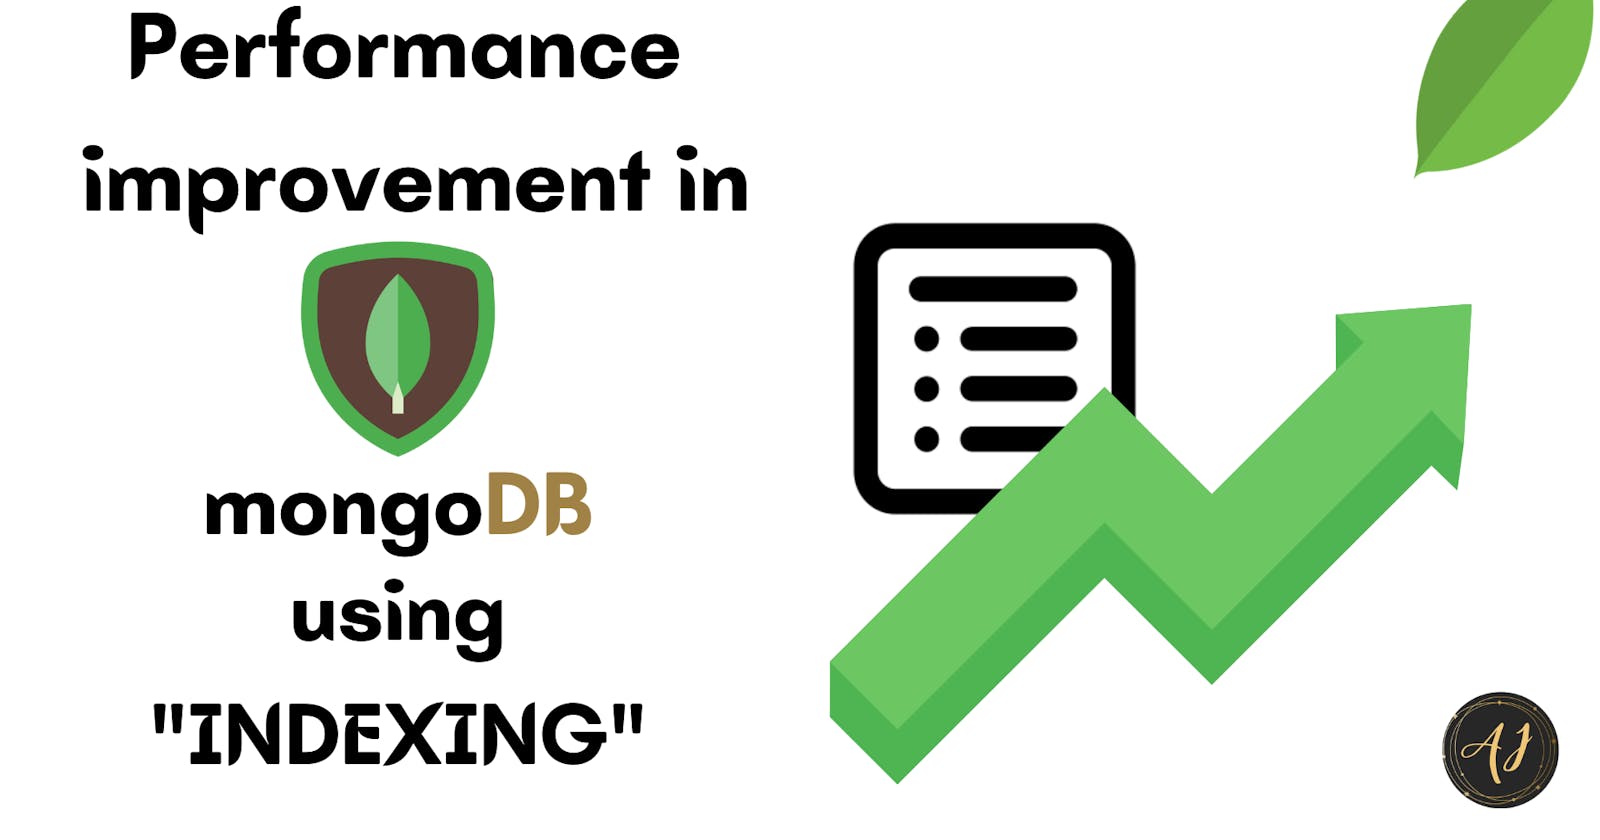 Performance improvement in mongoDB using INDEXING